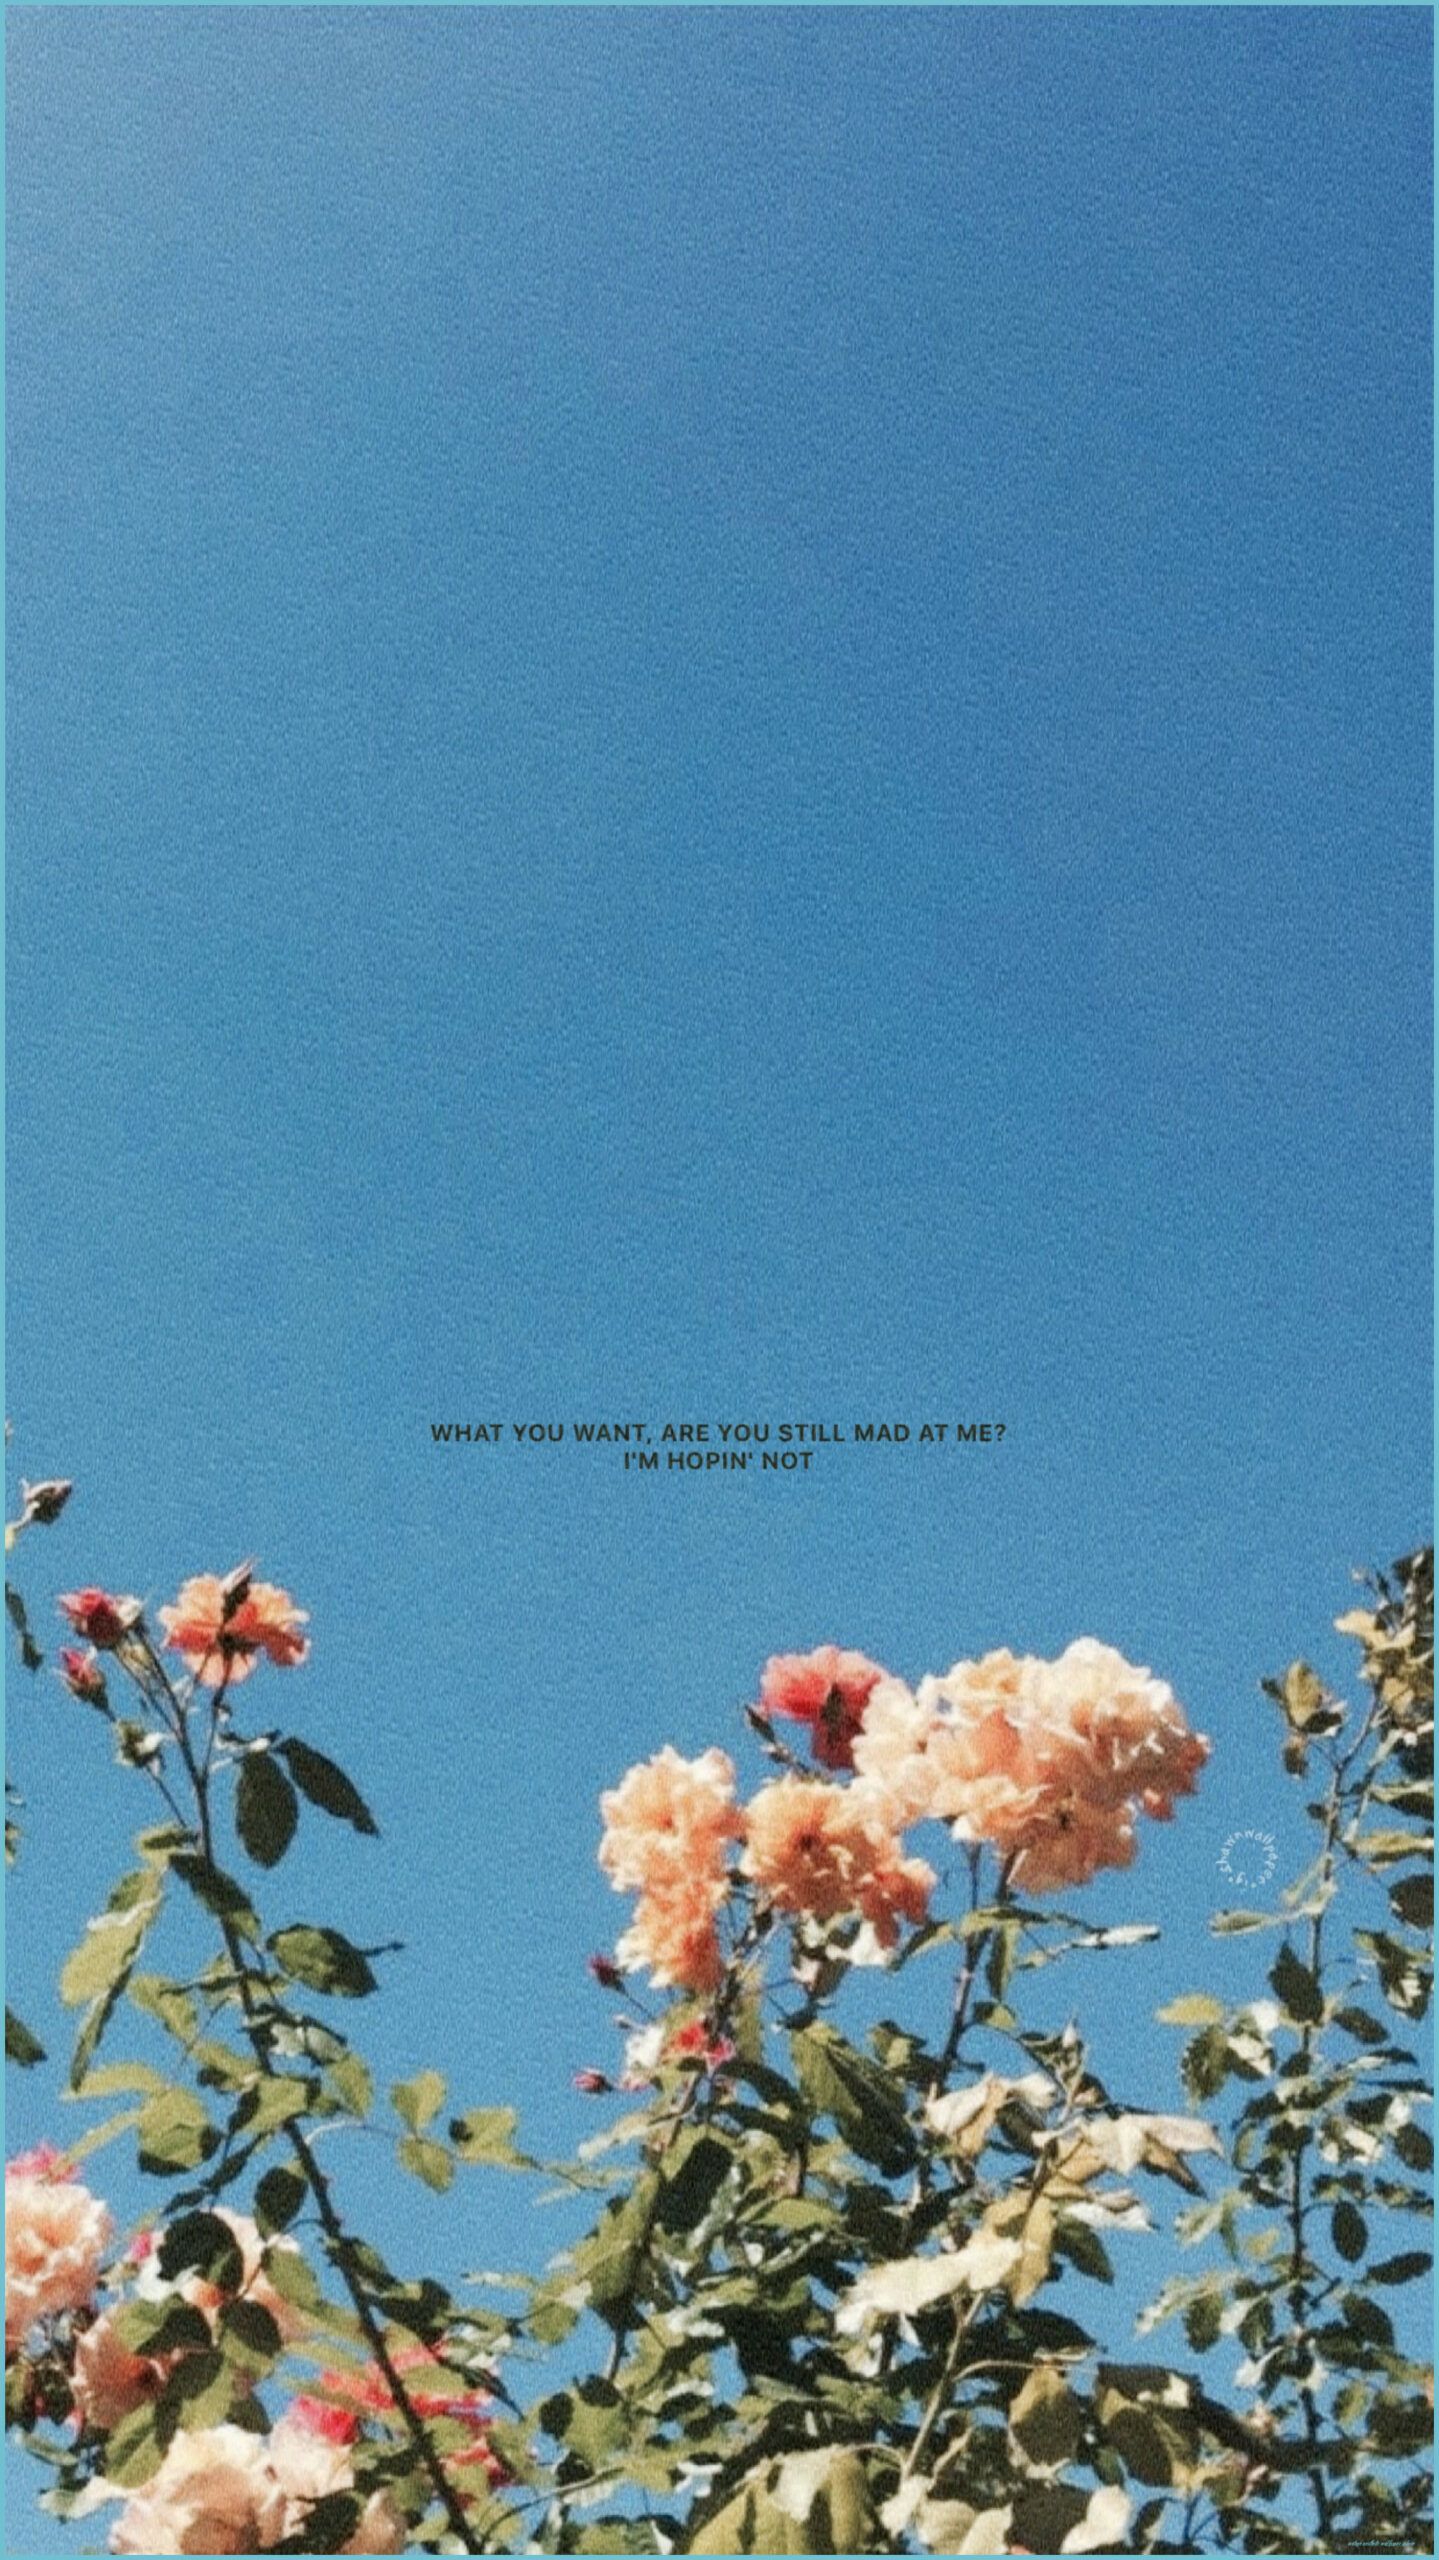 A poster with some flowers and blue sky - Vintage, bright